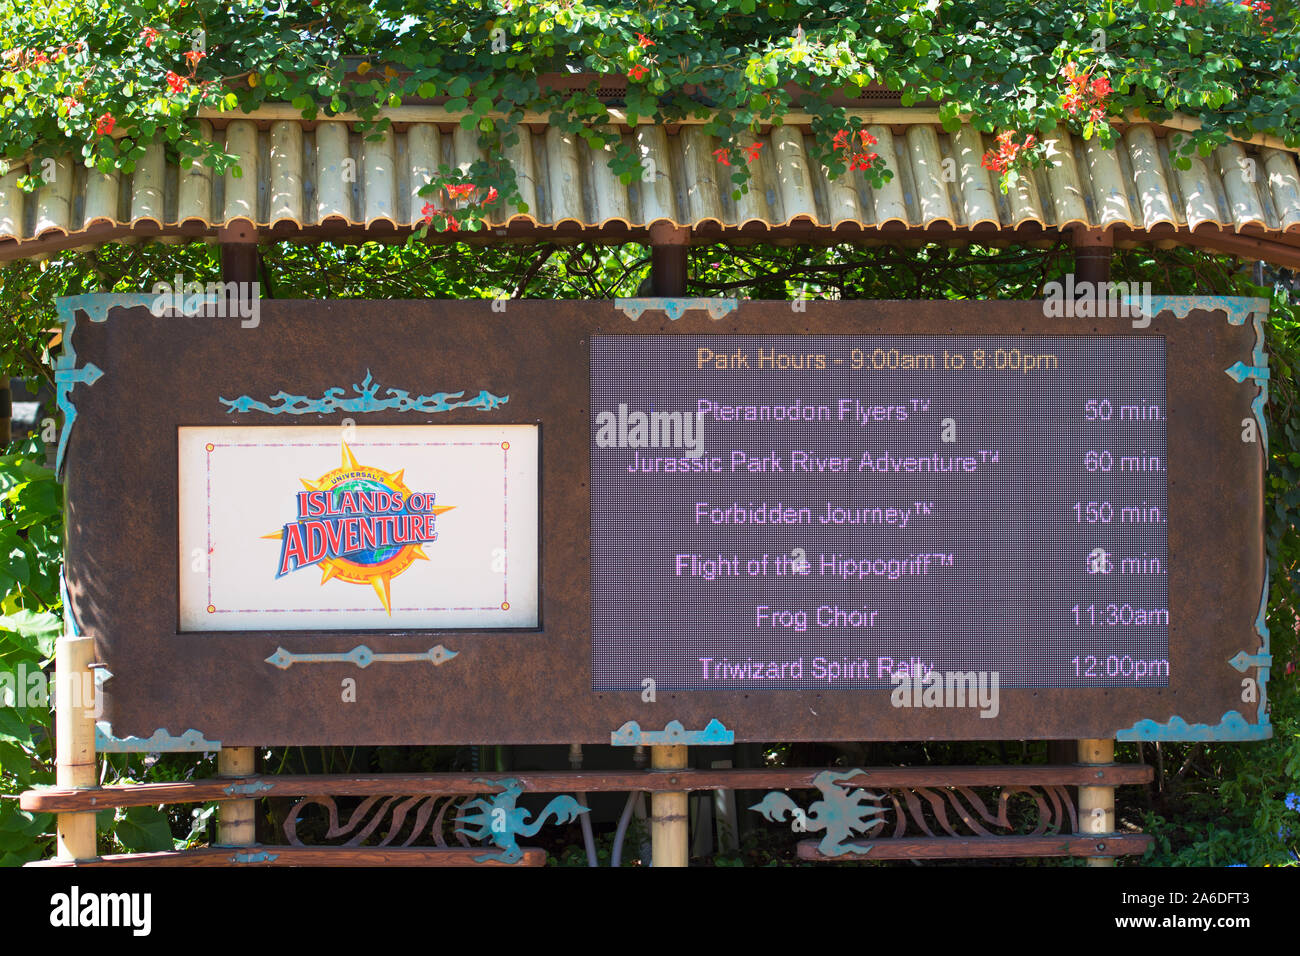 Universal Studios Sign Park Hours and Attraction and Ride Wait Times Posted, Islands of Adventure, Orlando, Florida, USA Stock Photo